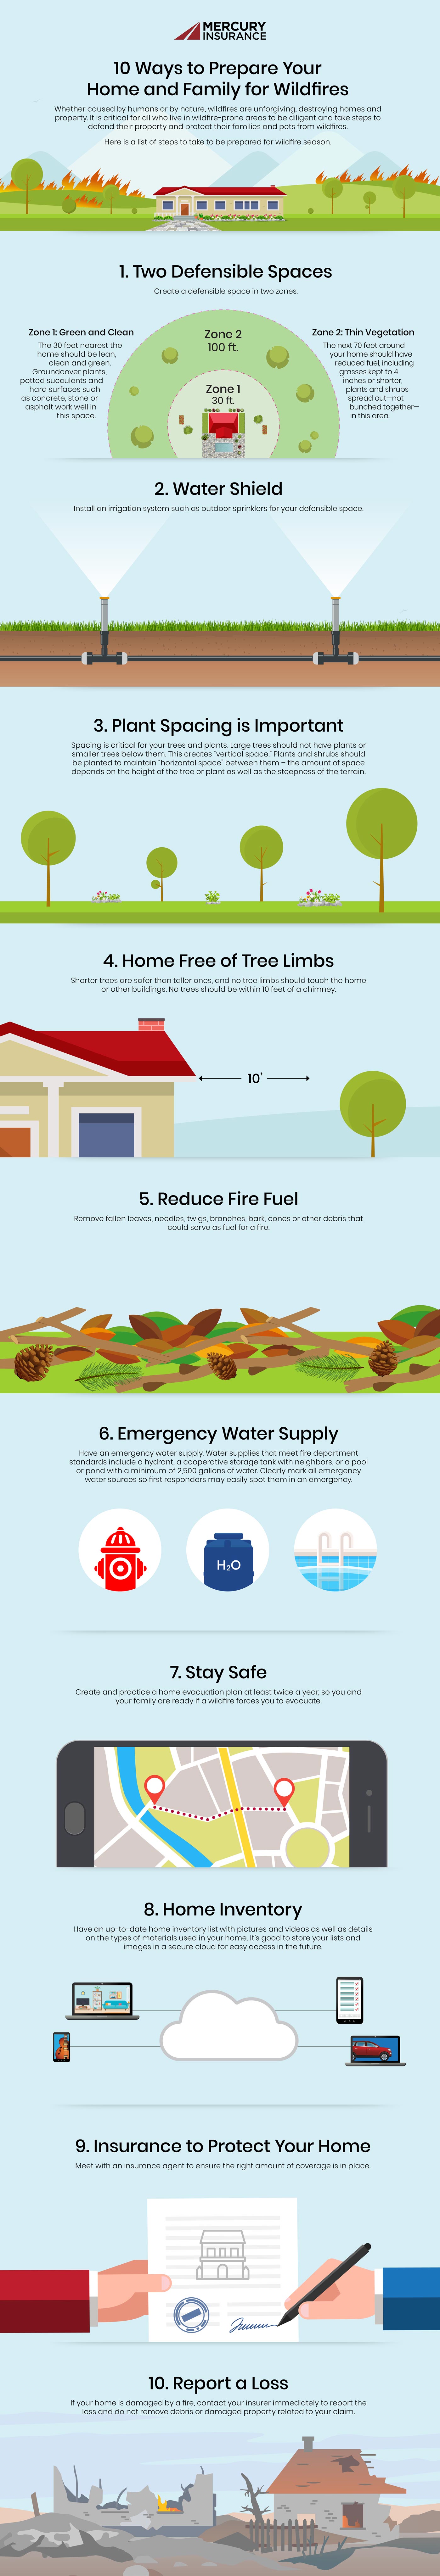 Infographic: 10 Ways to Prepare Your Home and Family for Wildfires